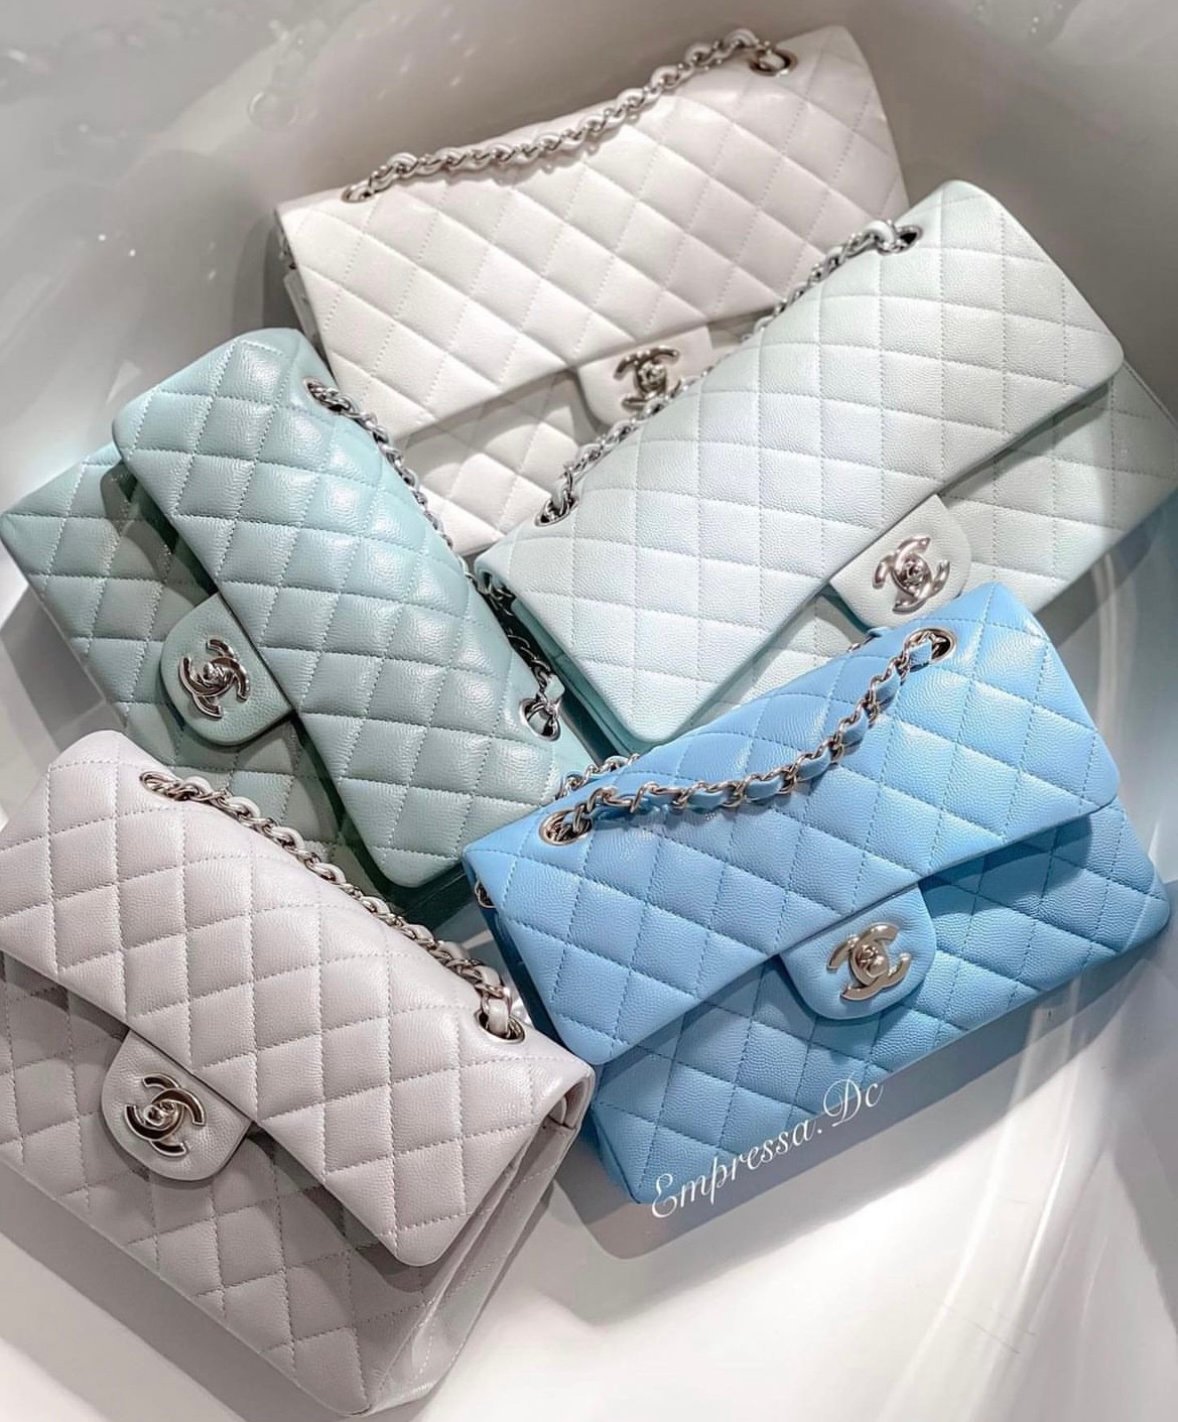 Chanel Classic Handbag Price In KL And Worldwide – The Prices Just Keep  Increasing!